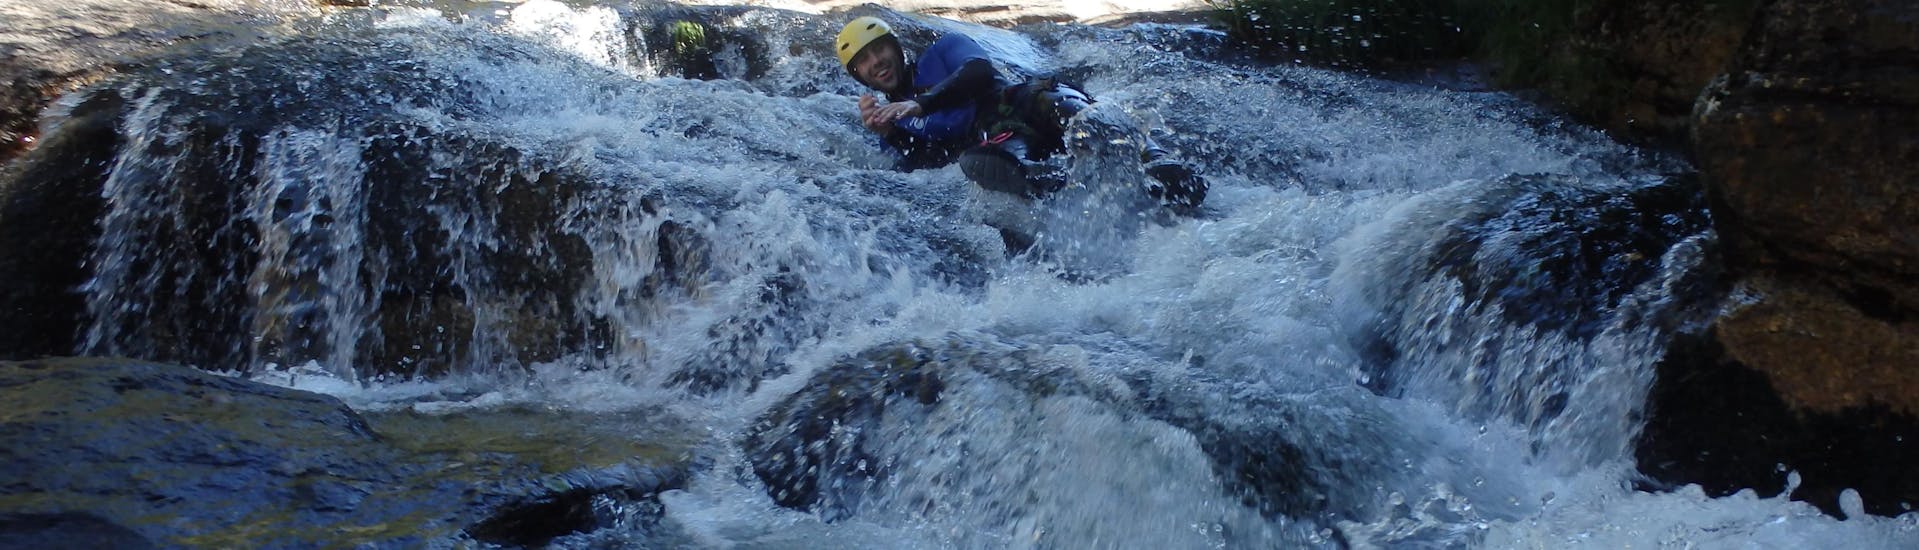 Canyoning in Río Almofrei for Families & Friends.